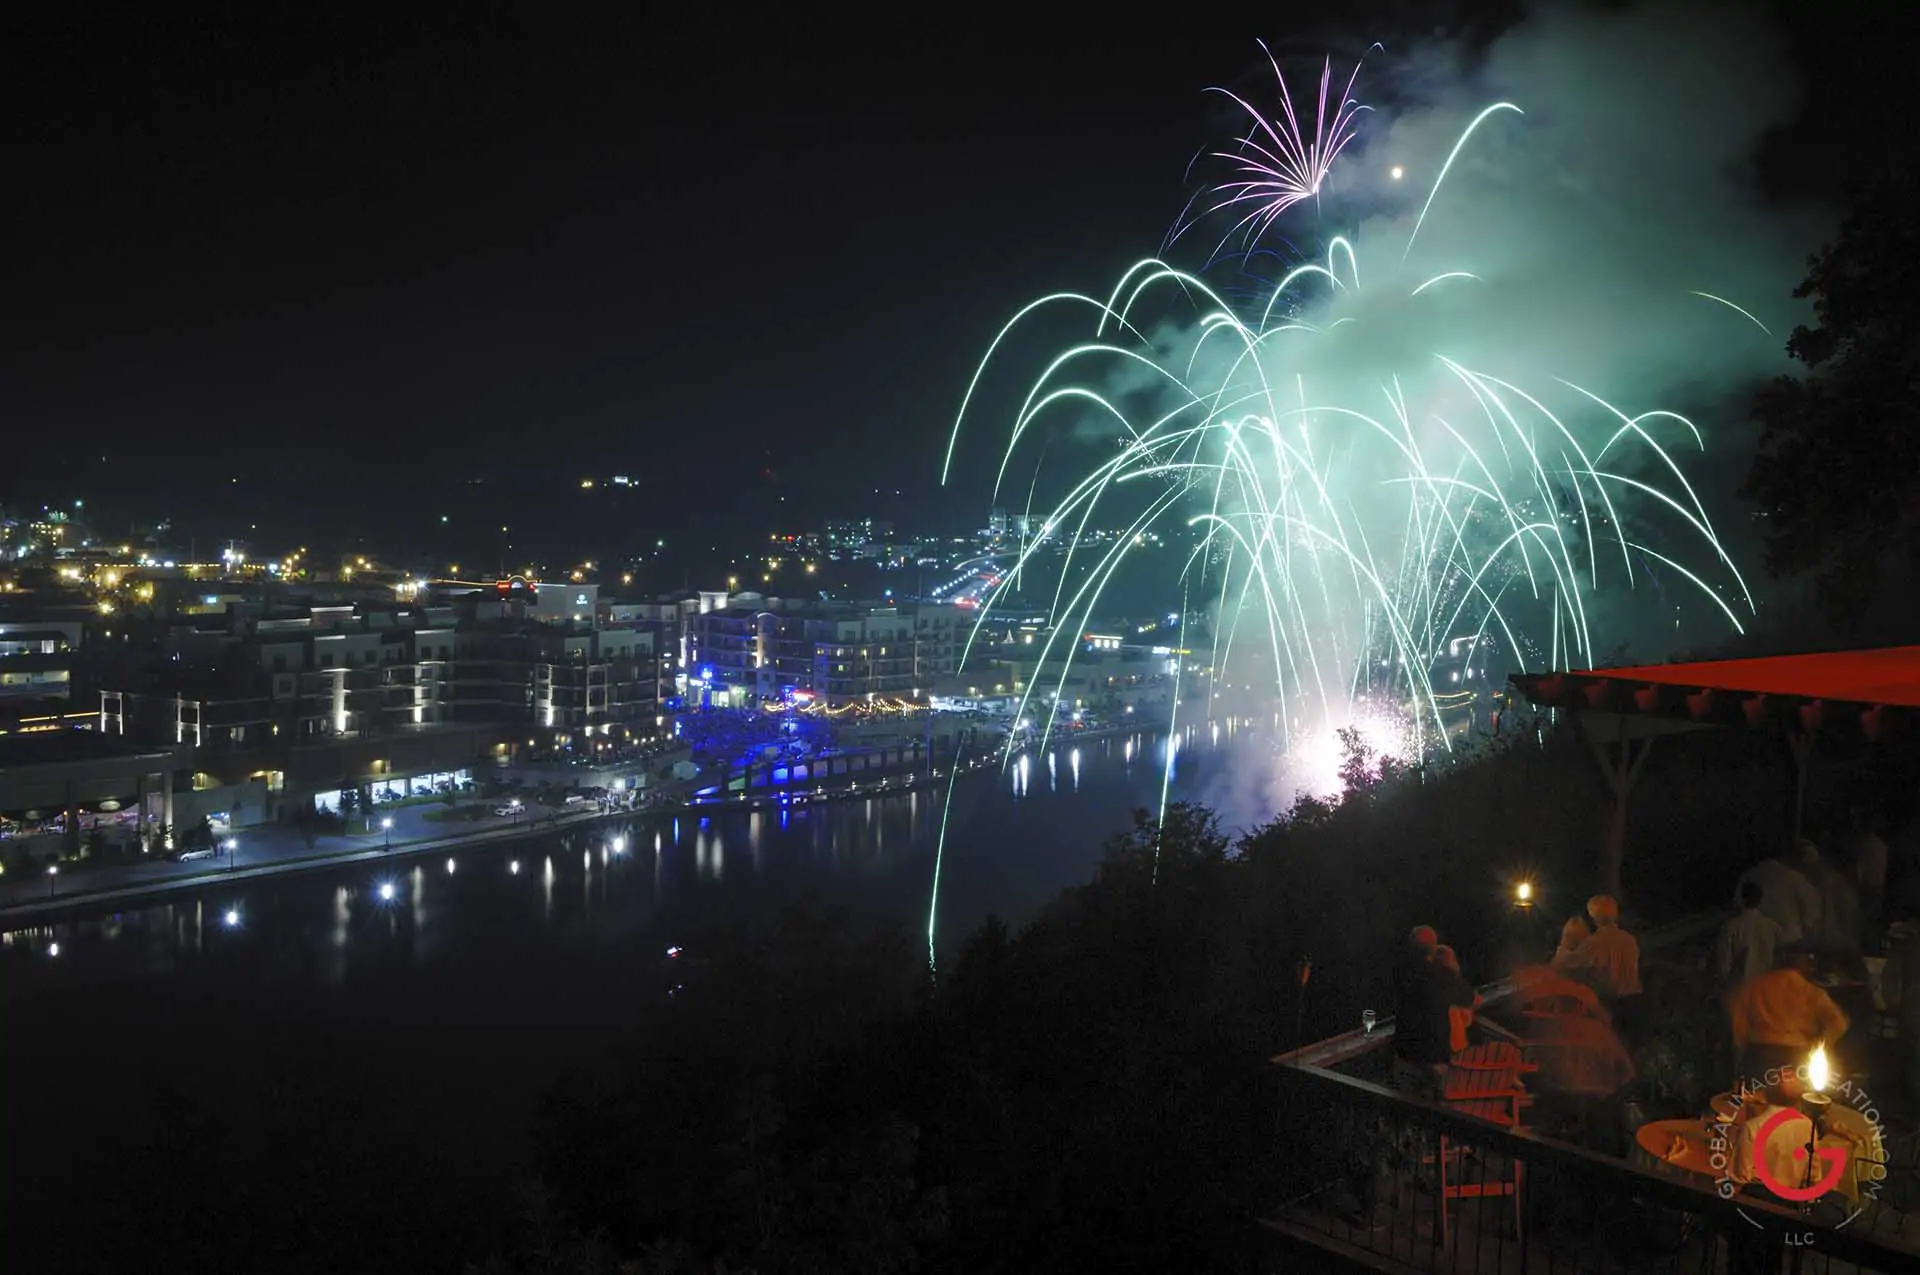 Diners gather on a balcony overlooking the Branson Landing to enjoy fireworks over lake Tanycomo. - Advertising photographers in Branson Missouri, Branson Missouri photography